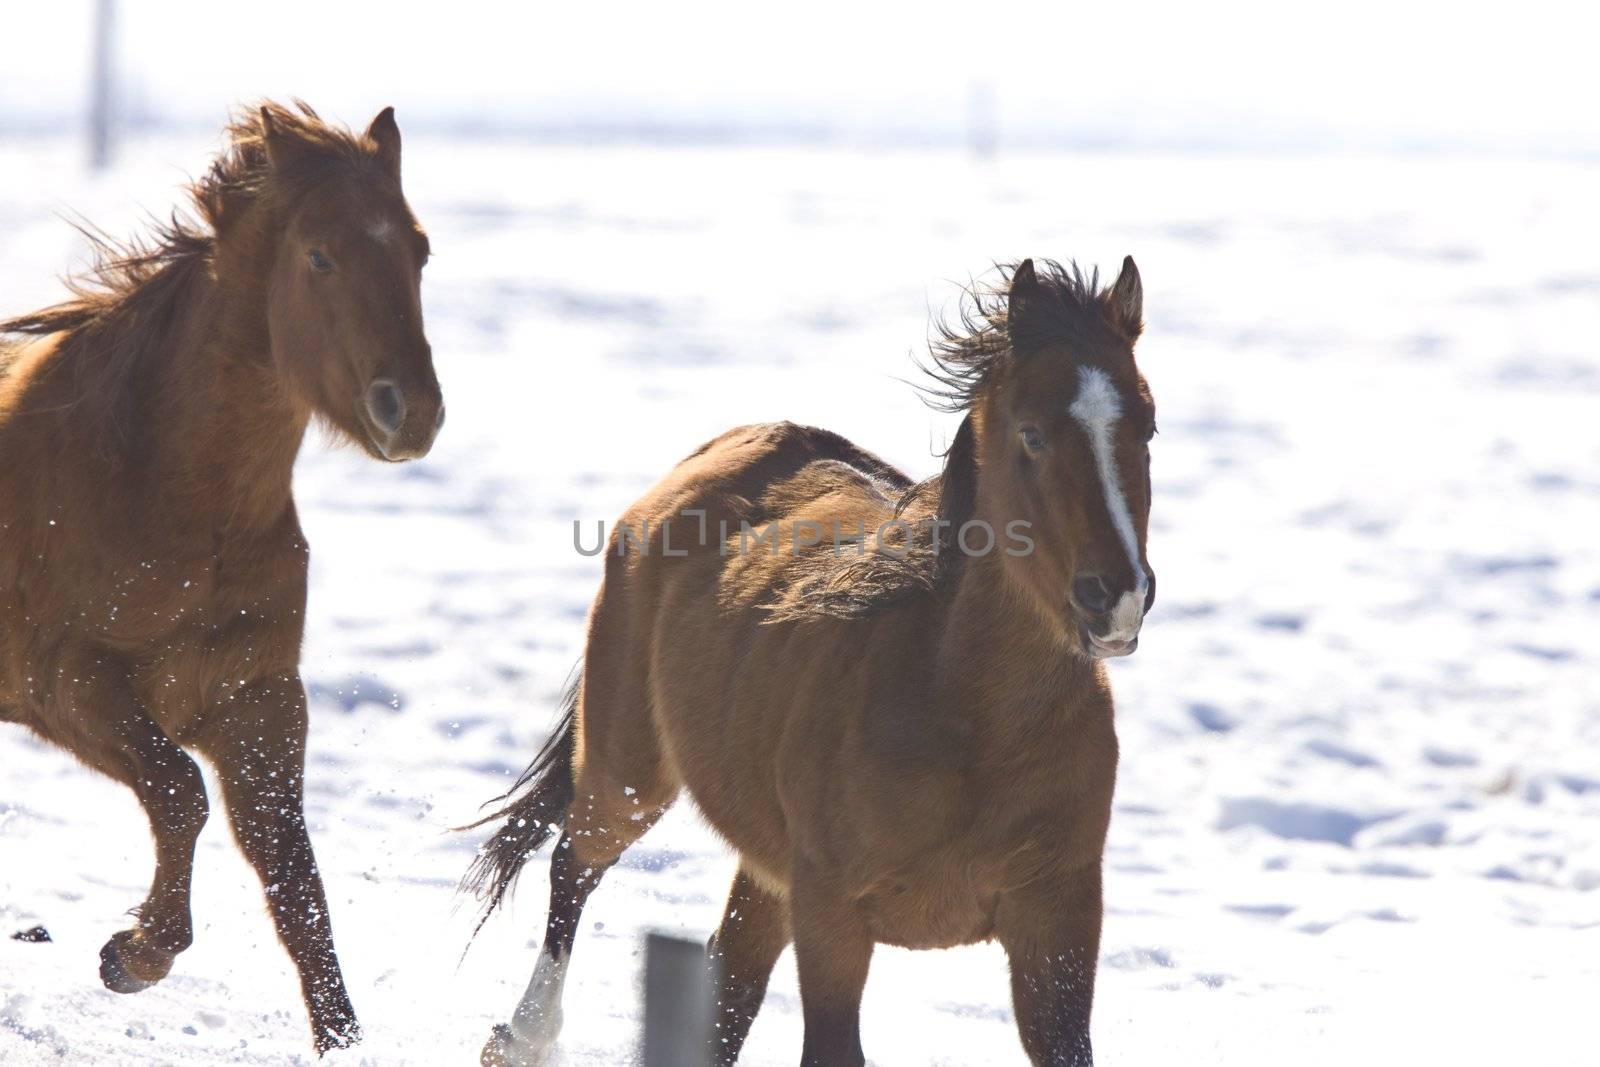 Horses running in Winter Canada by pictureguy